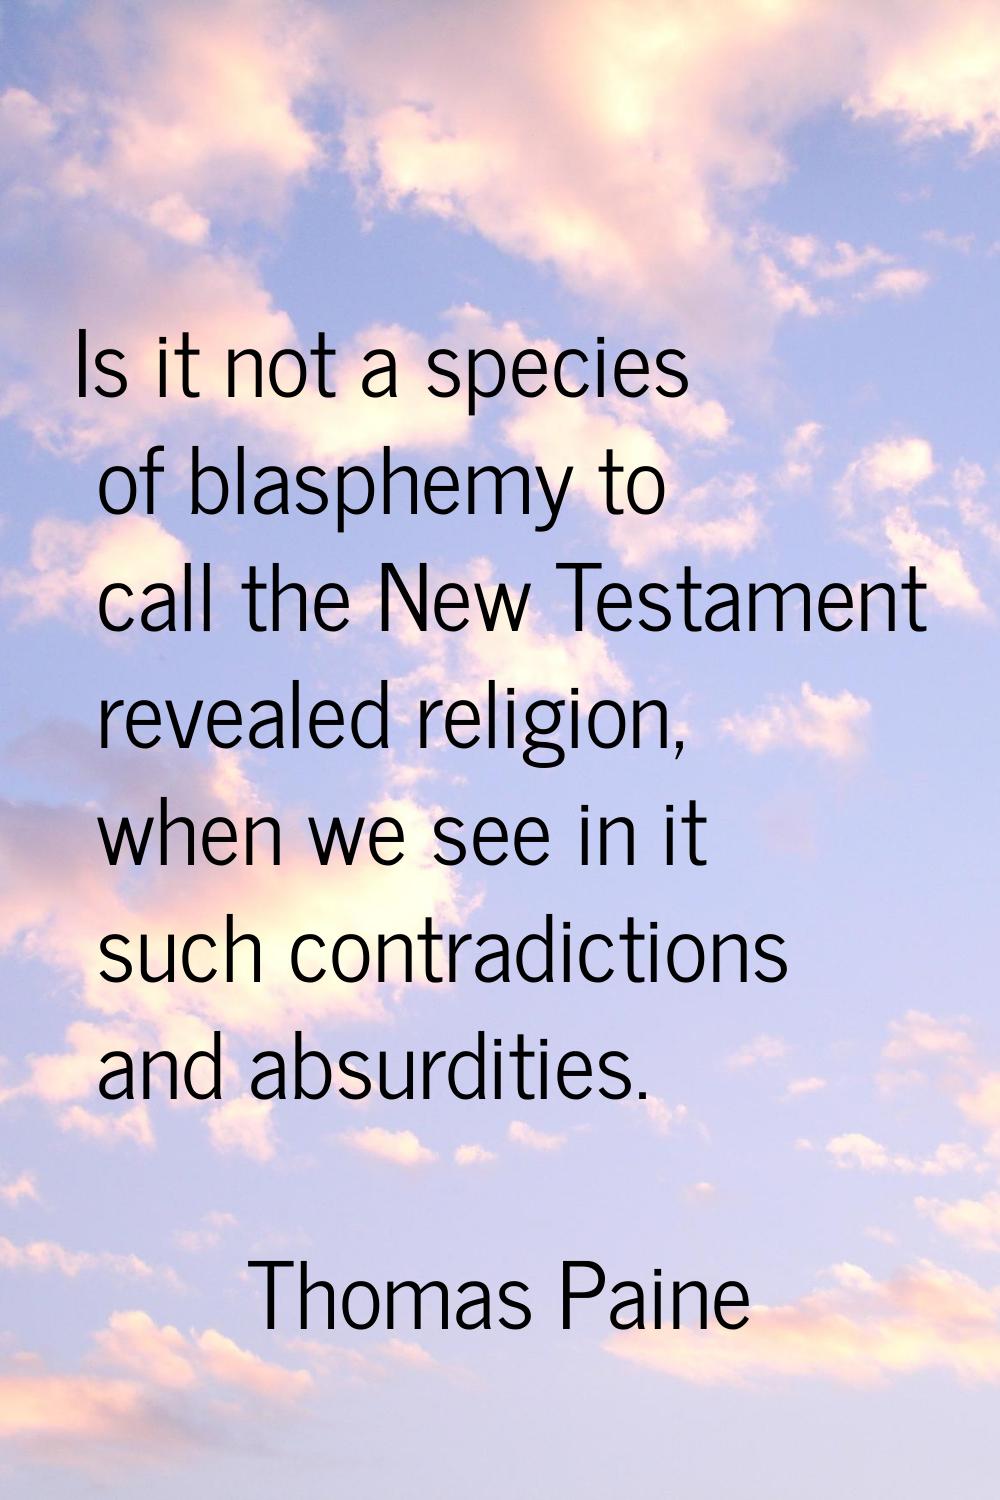 Is it not a species of blasphemy to call the New Testament revealed religion, when we see in it suc